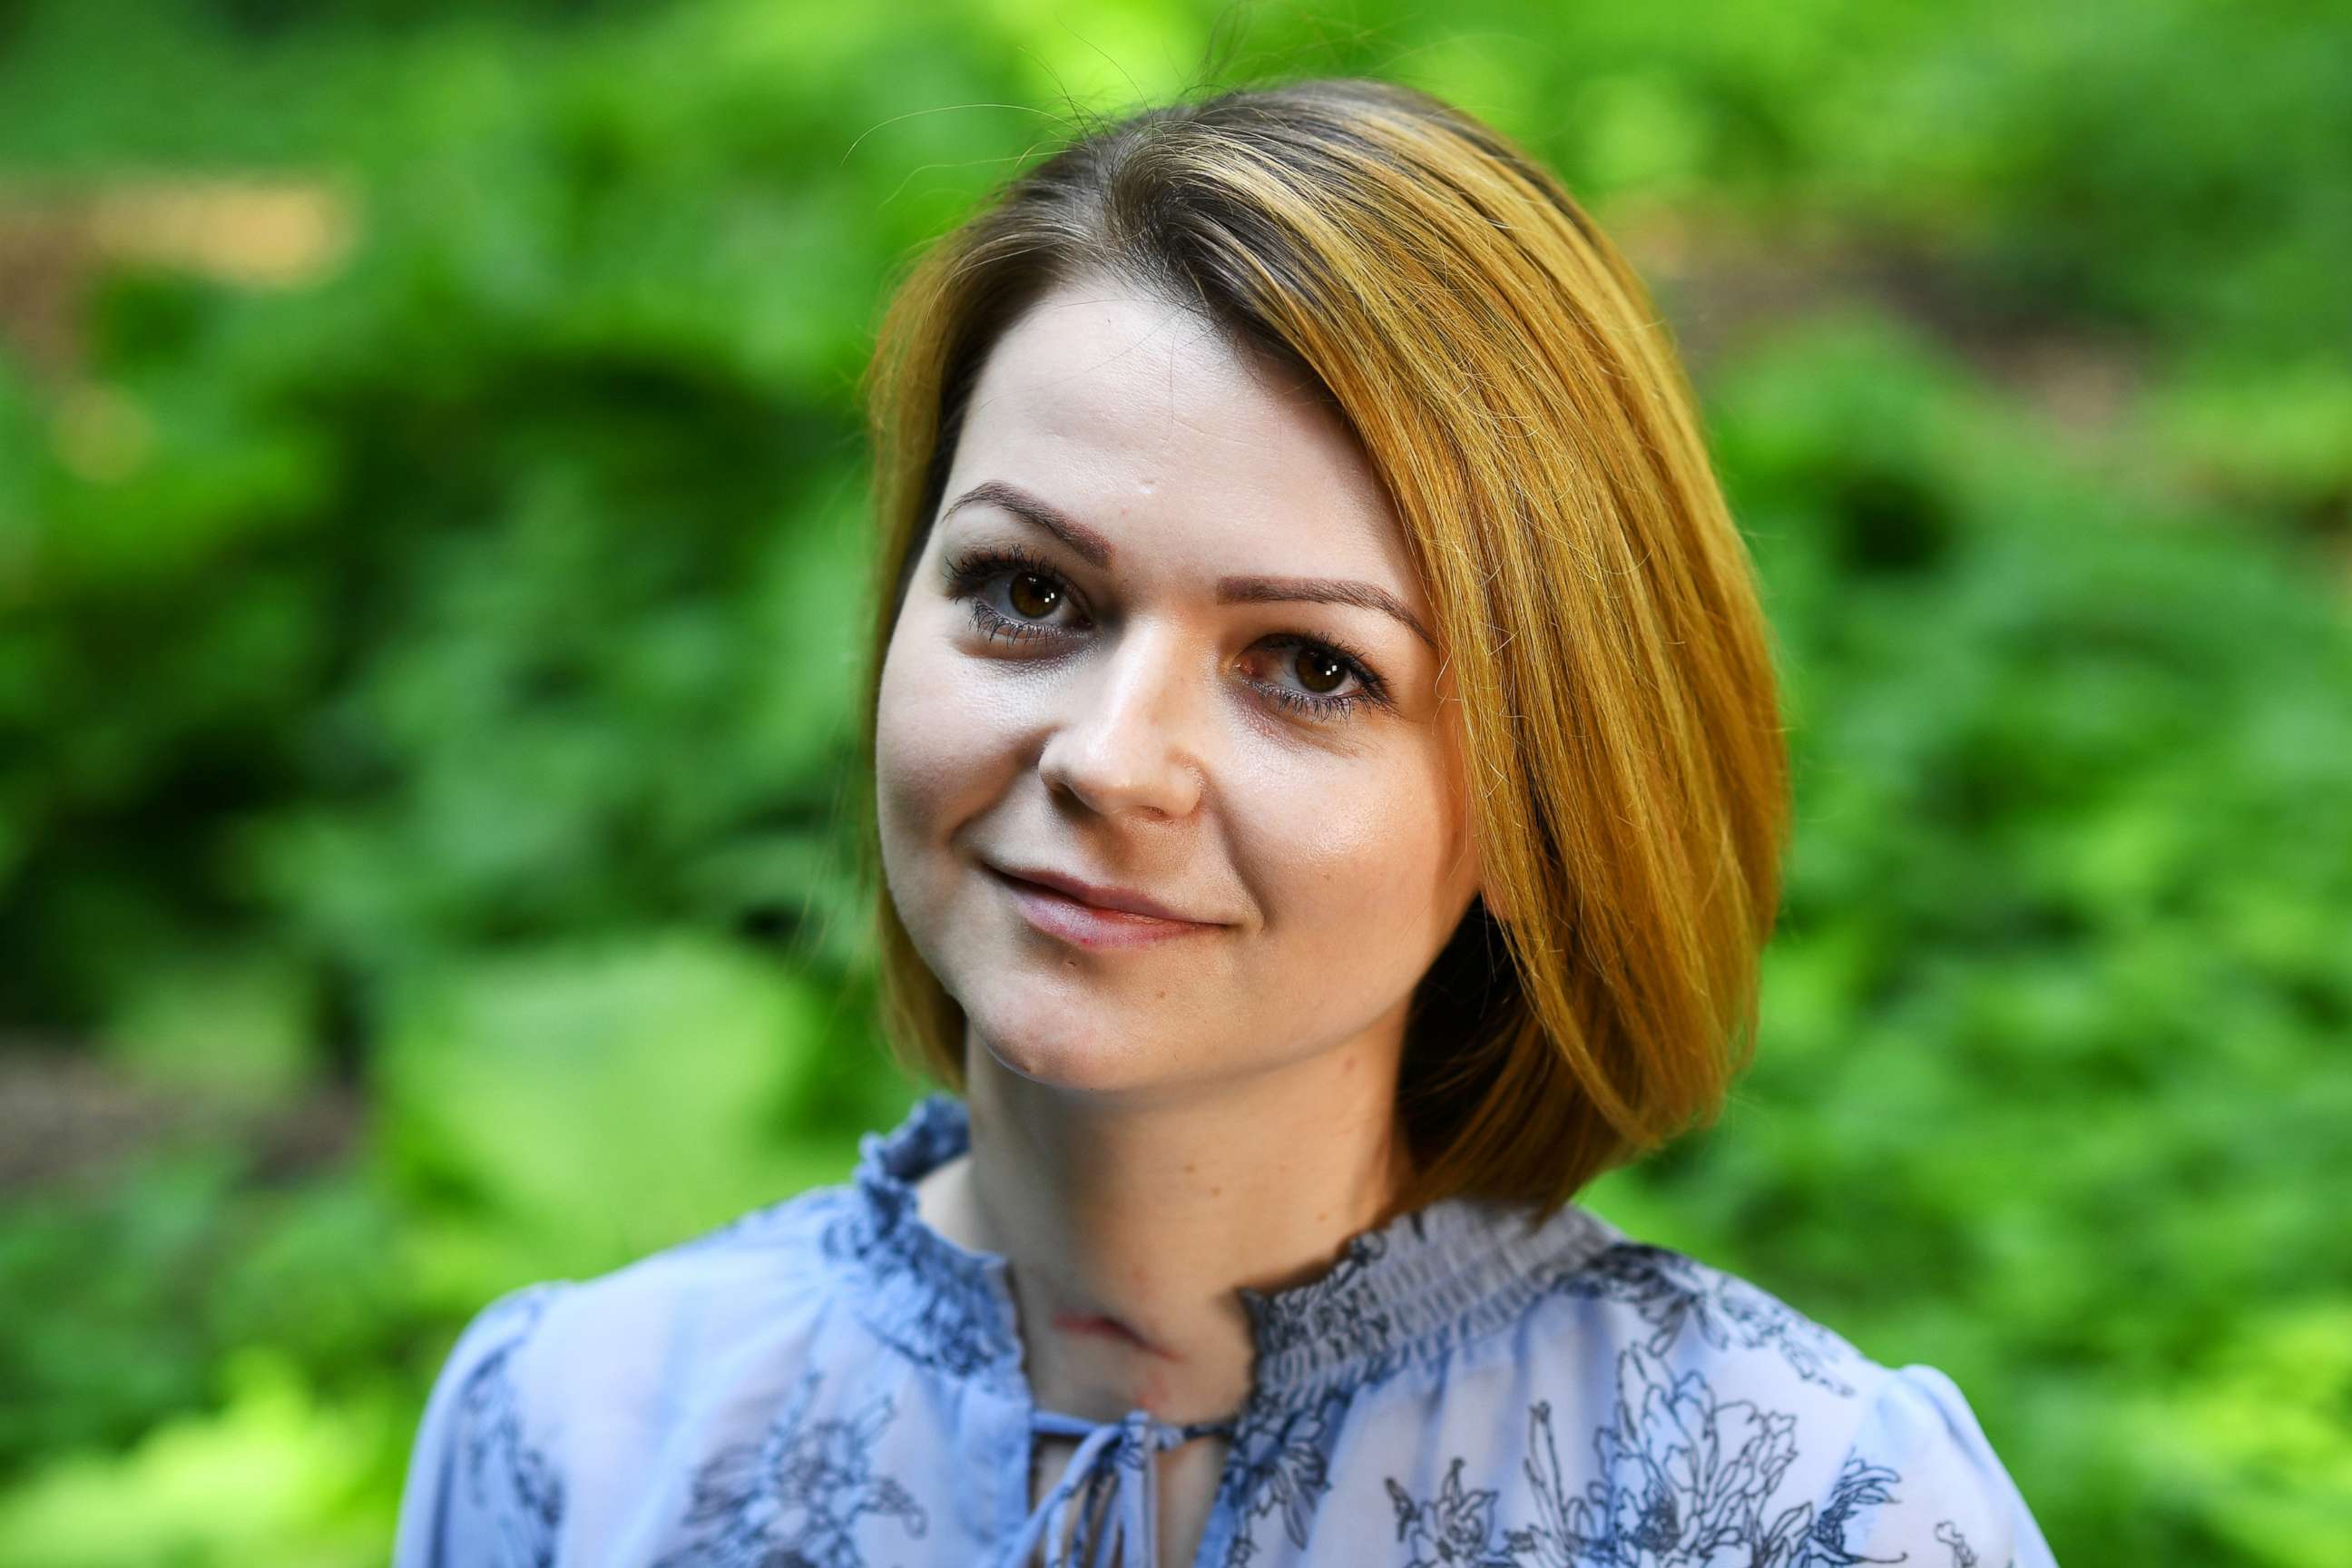 PHOTO: Yulia Skripal, who was poisoned in Salisbury along with her father, Russian spy Sergei Skripal, speaks to Reuters in London, on May 23, 2018.